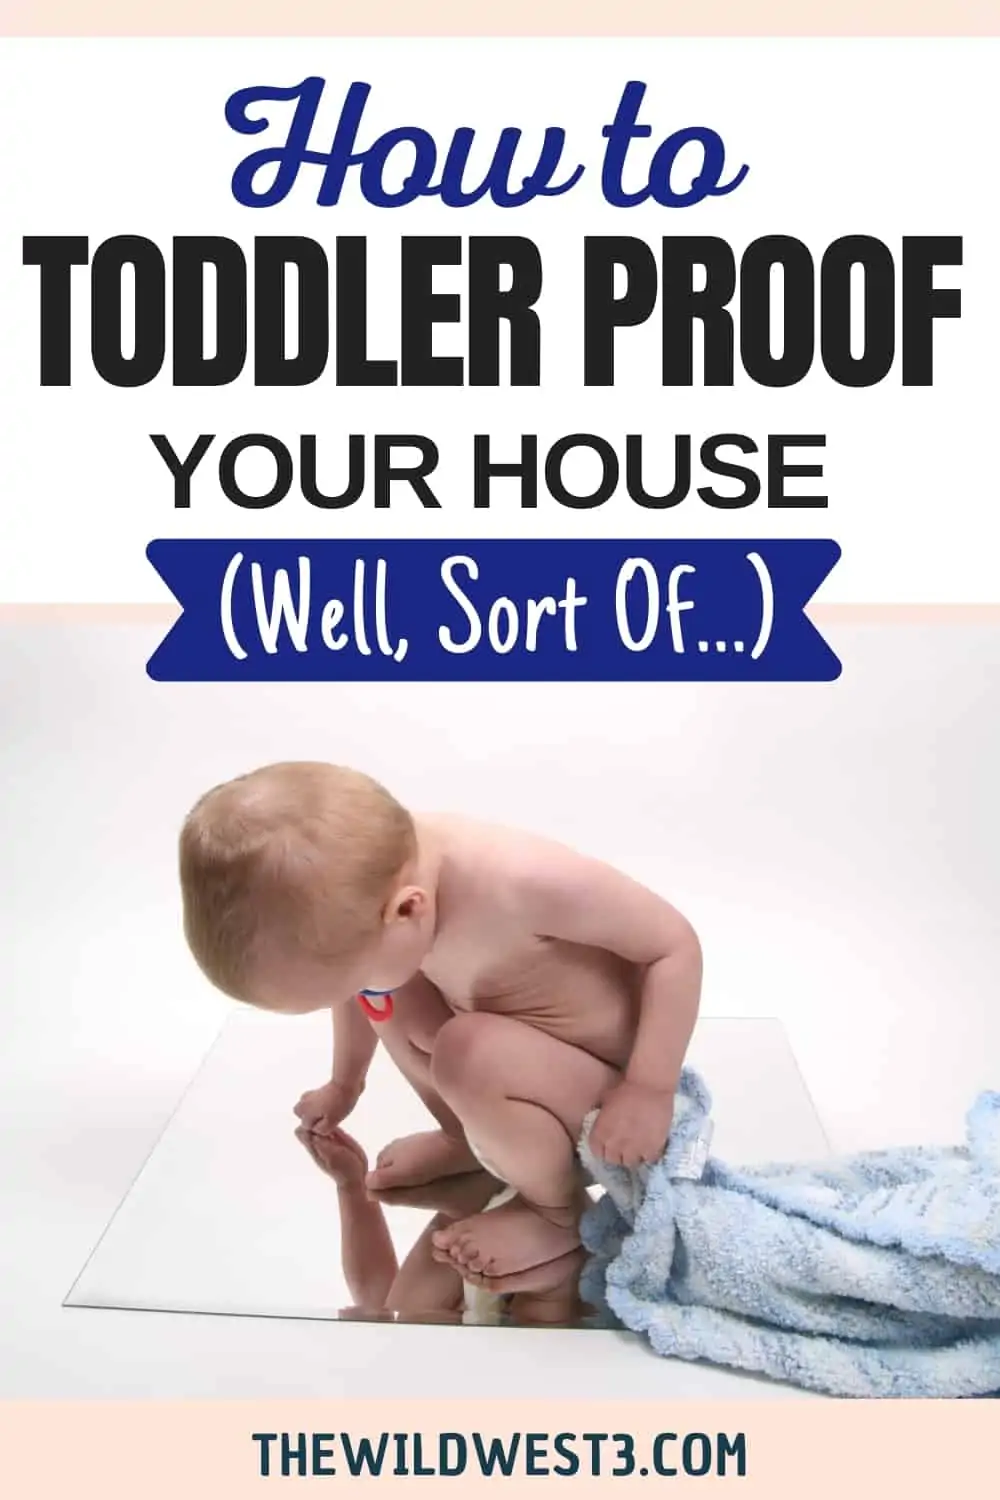 How to toddler proof your house pinterest image with a toddler walking